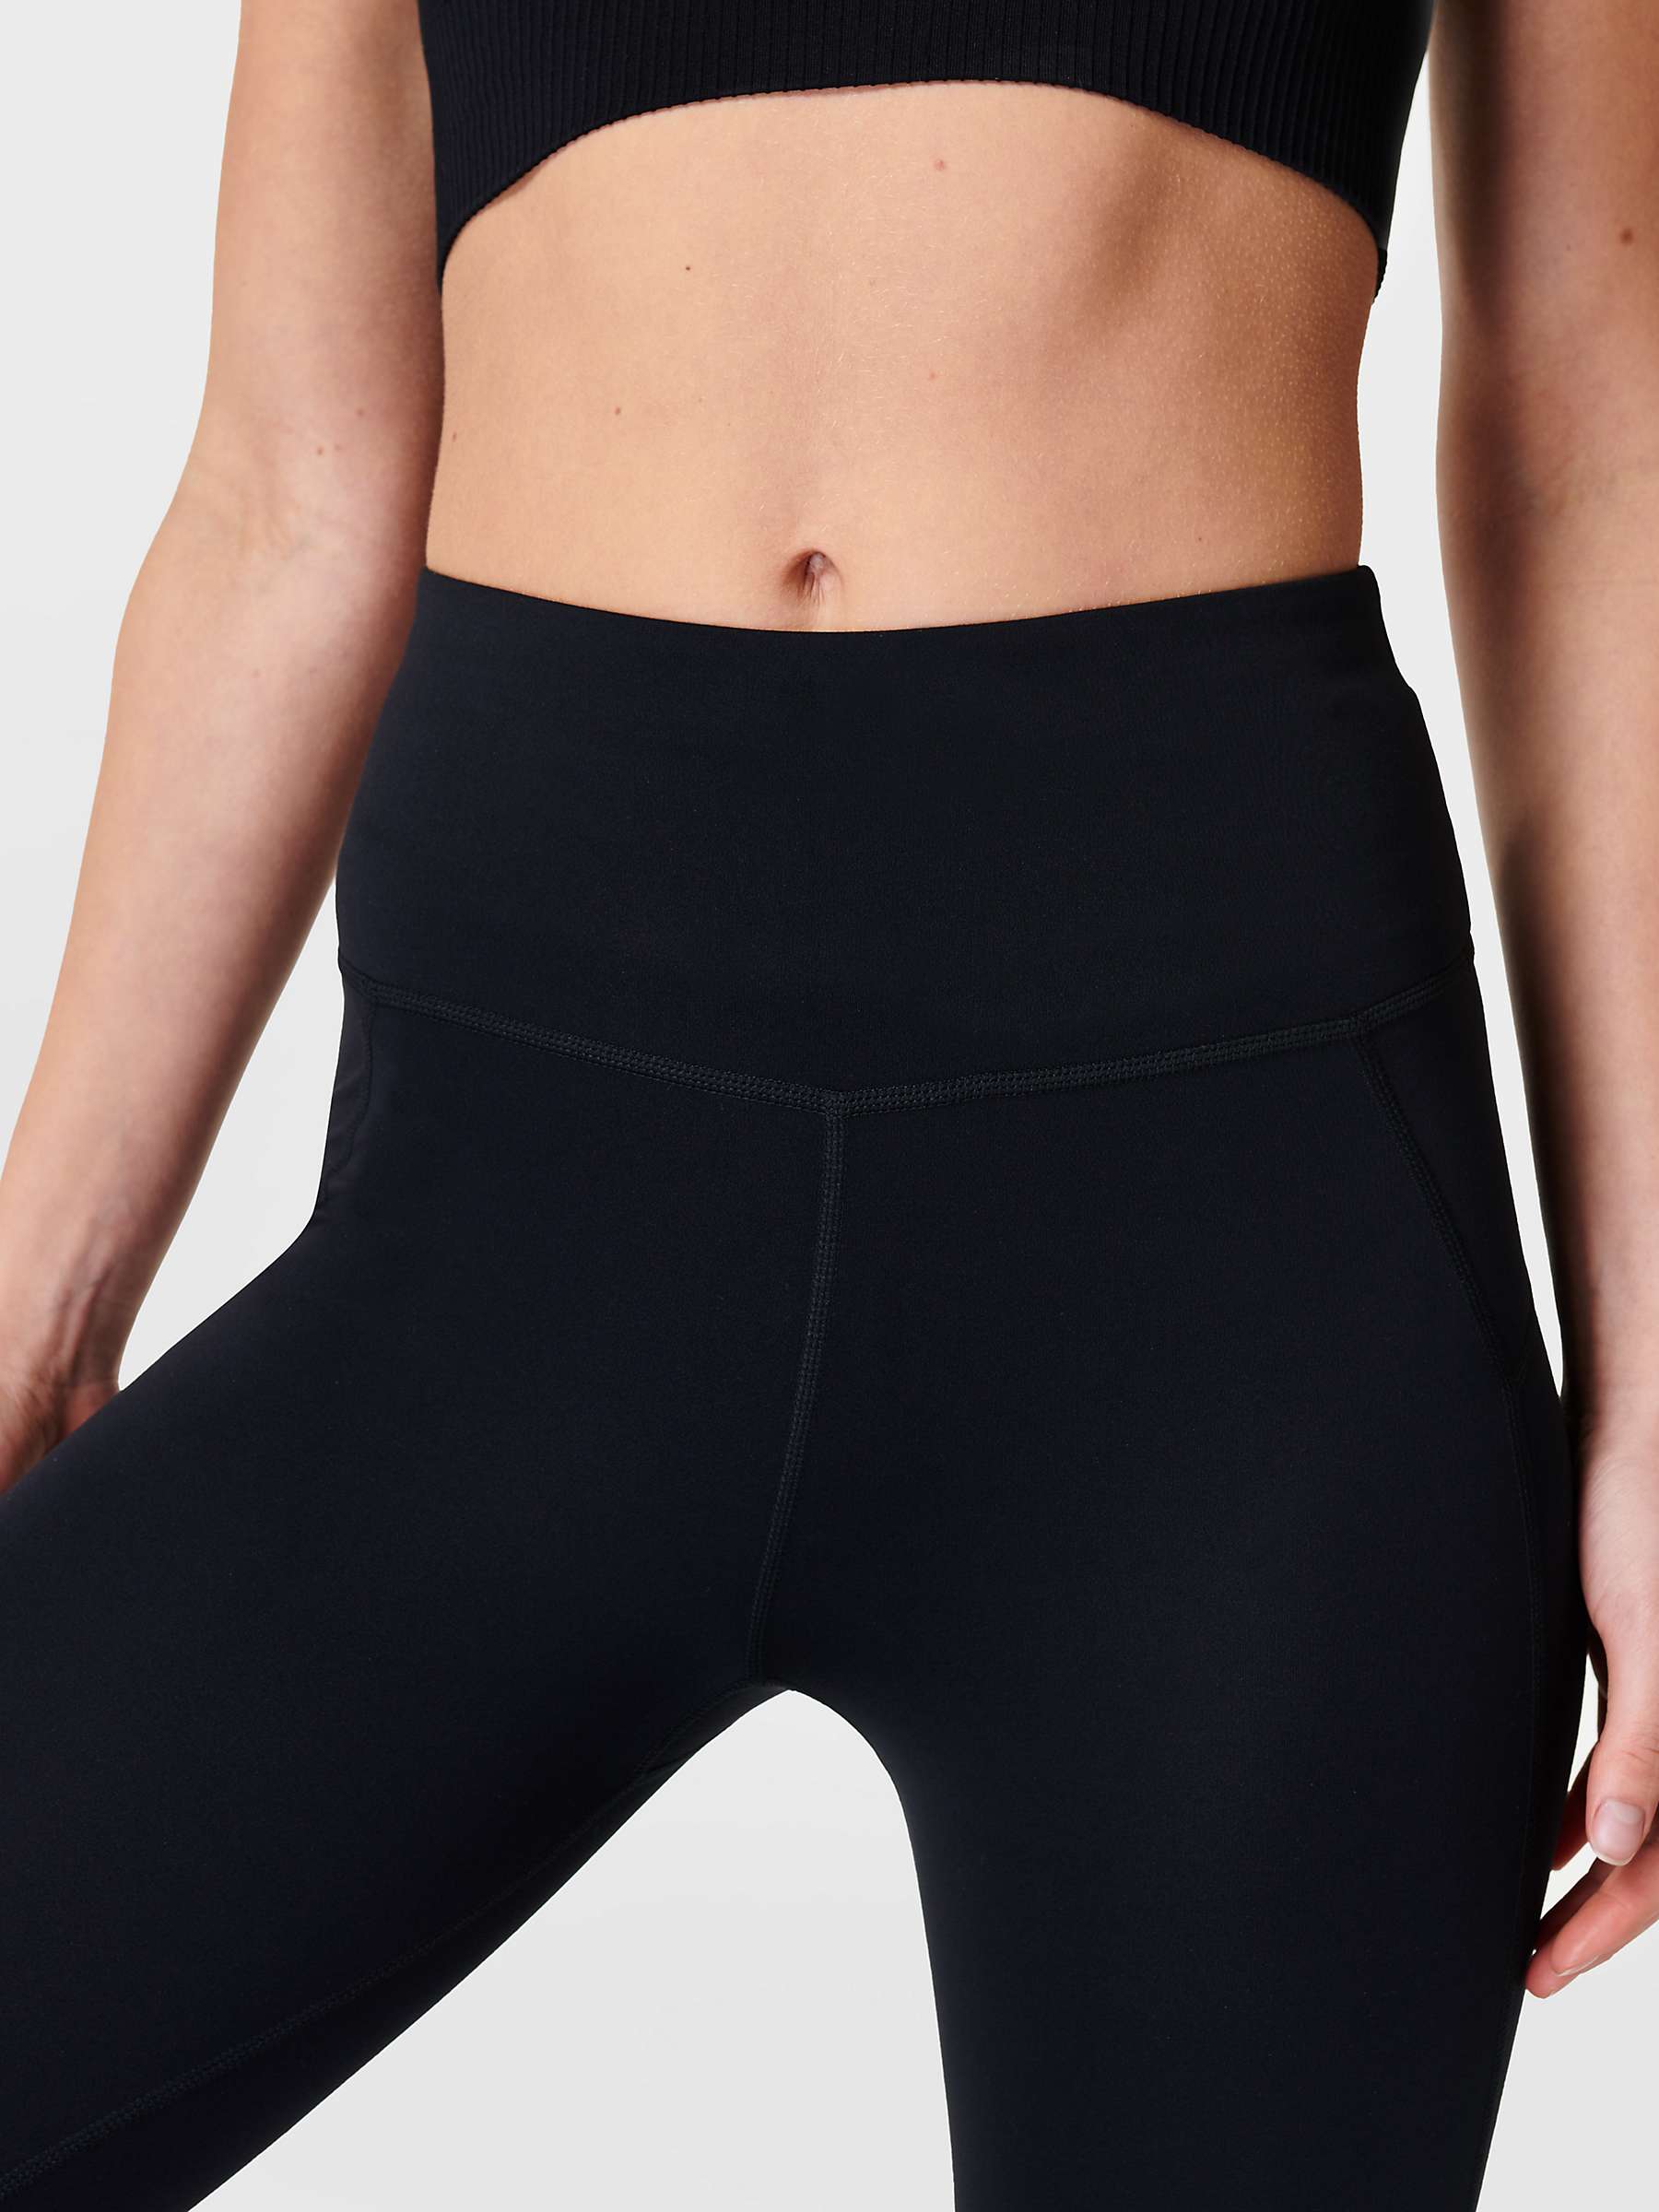 Buy Sweaty Betty All Day Gym Leggings Online at johnlewis.com